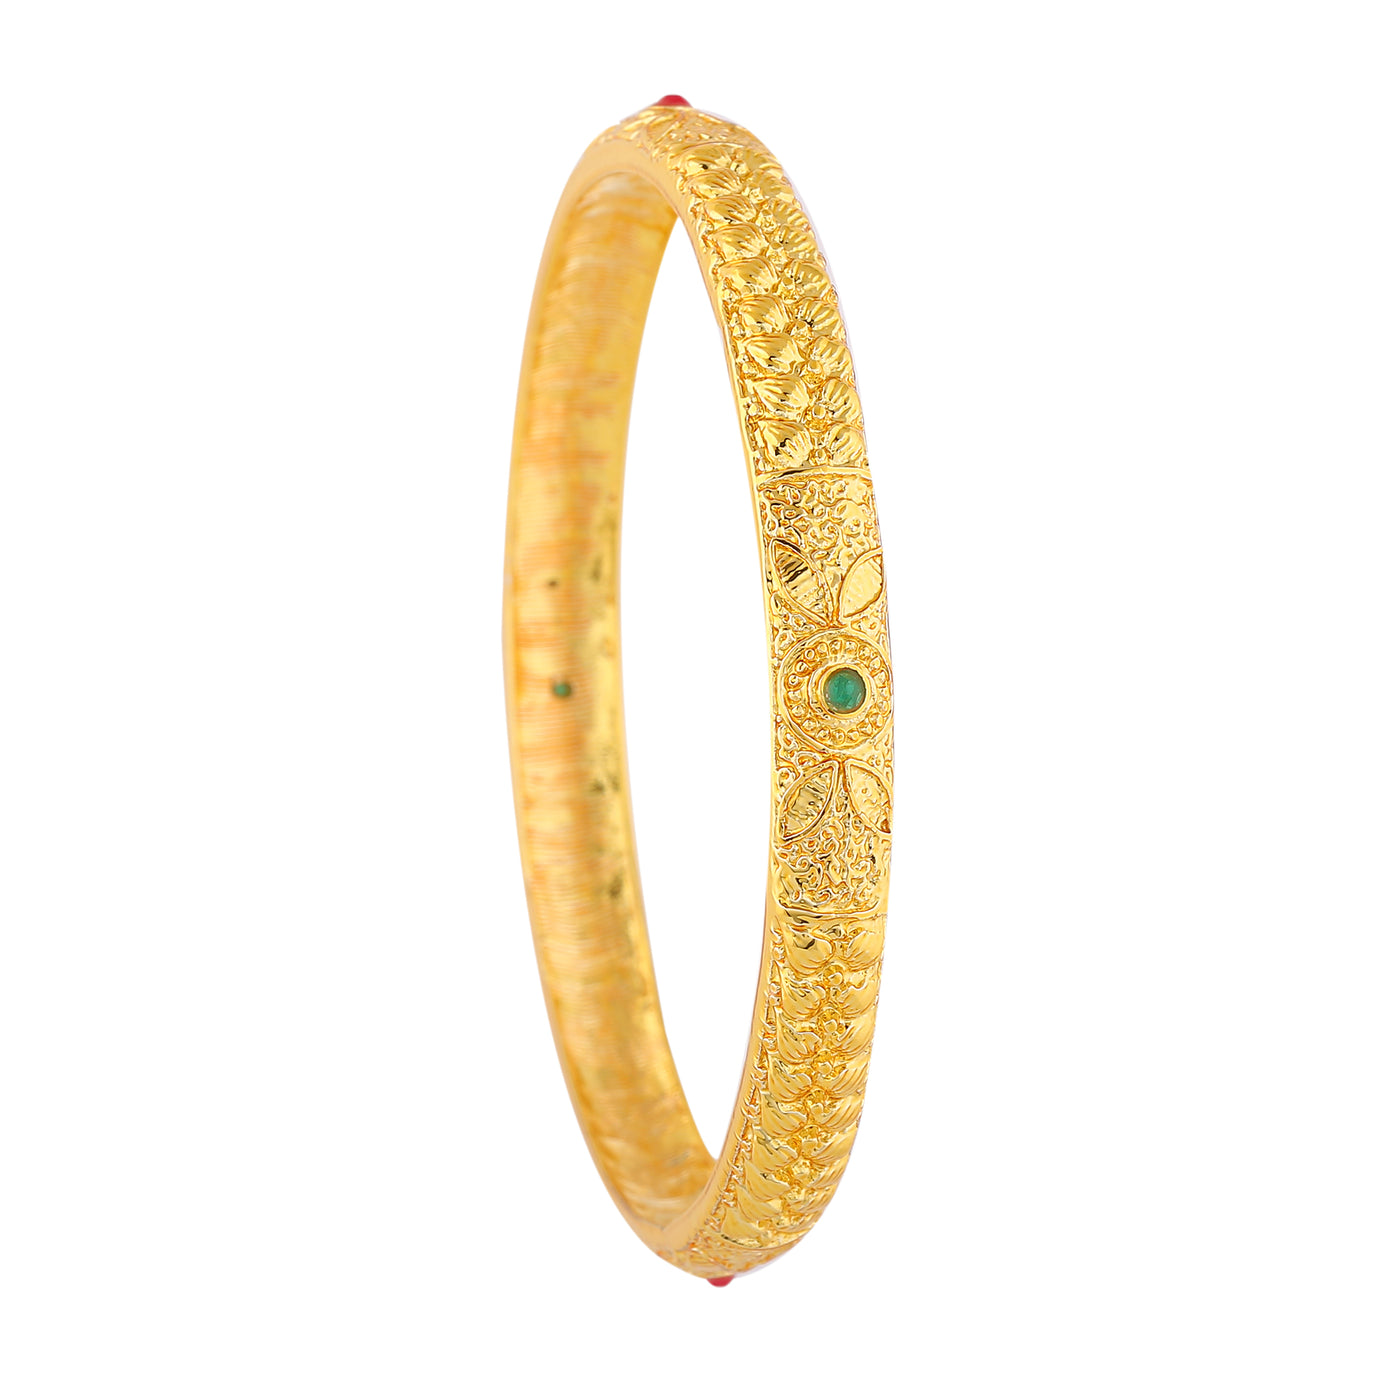 Estele Gold Plated Gorgeous Bangle with Colored Stones for Women